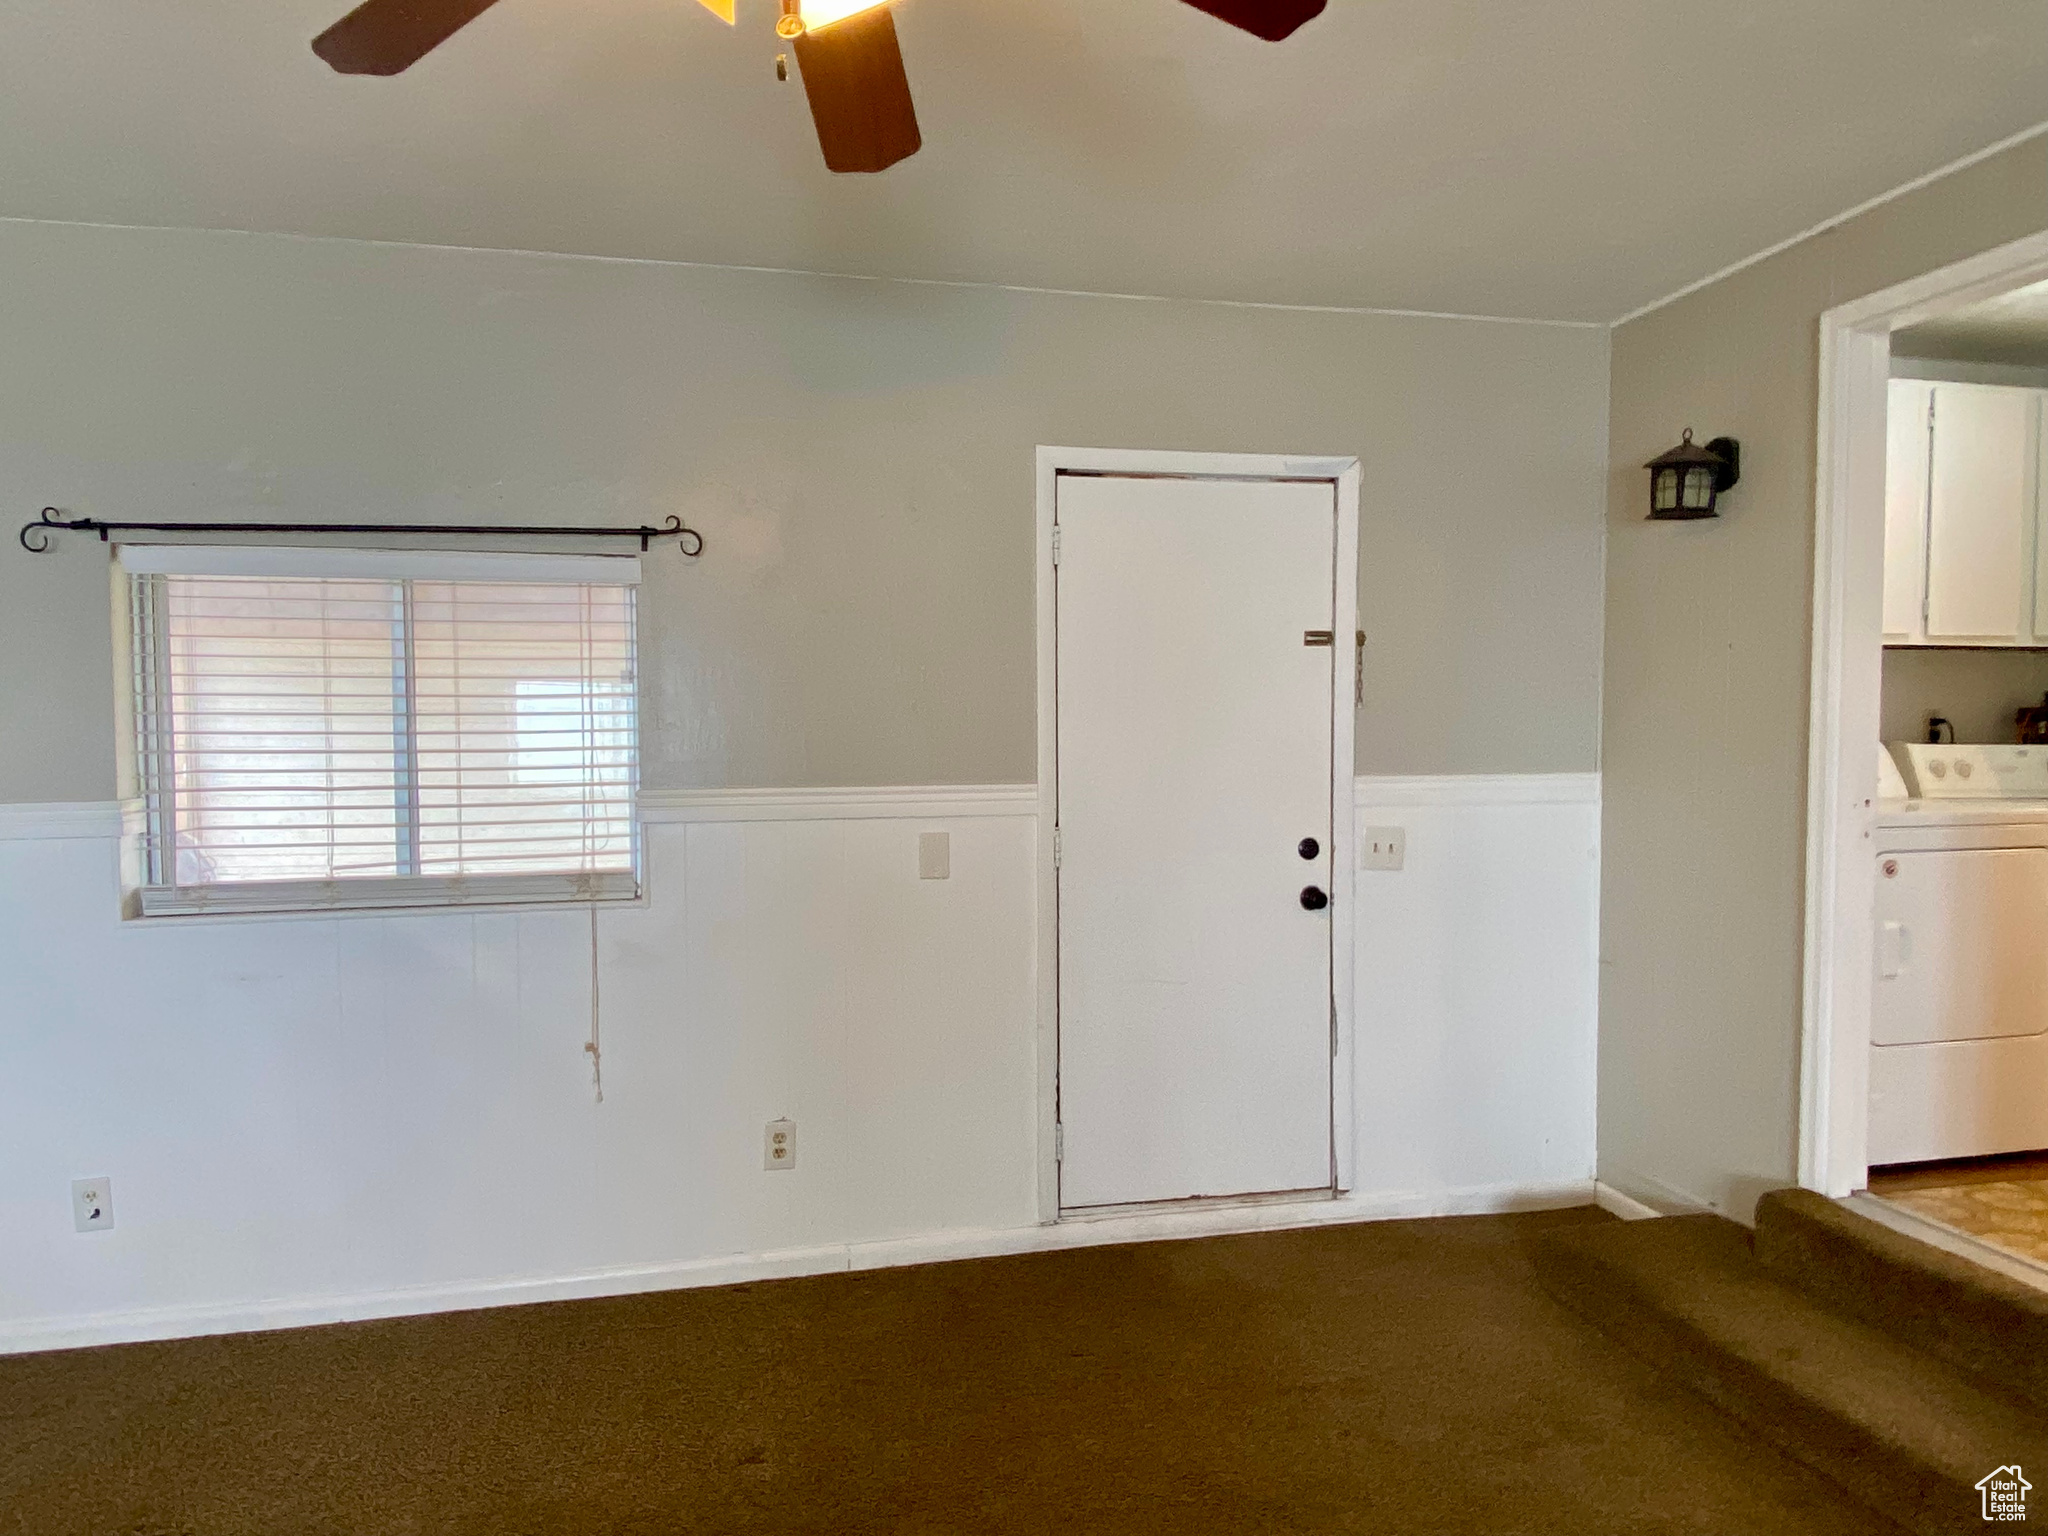 Unfurnished room featuring washer and clothes dryer, dark carpet, and ceiling fan